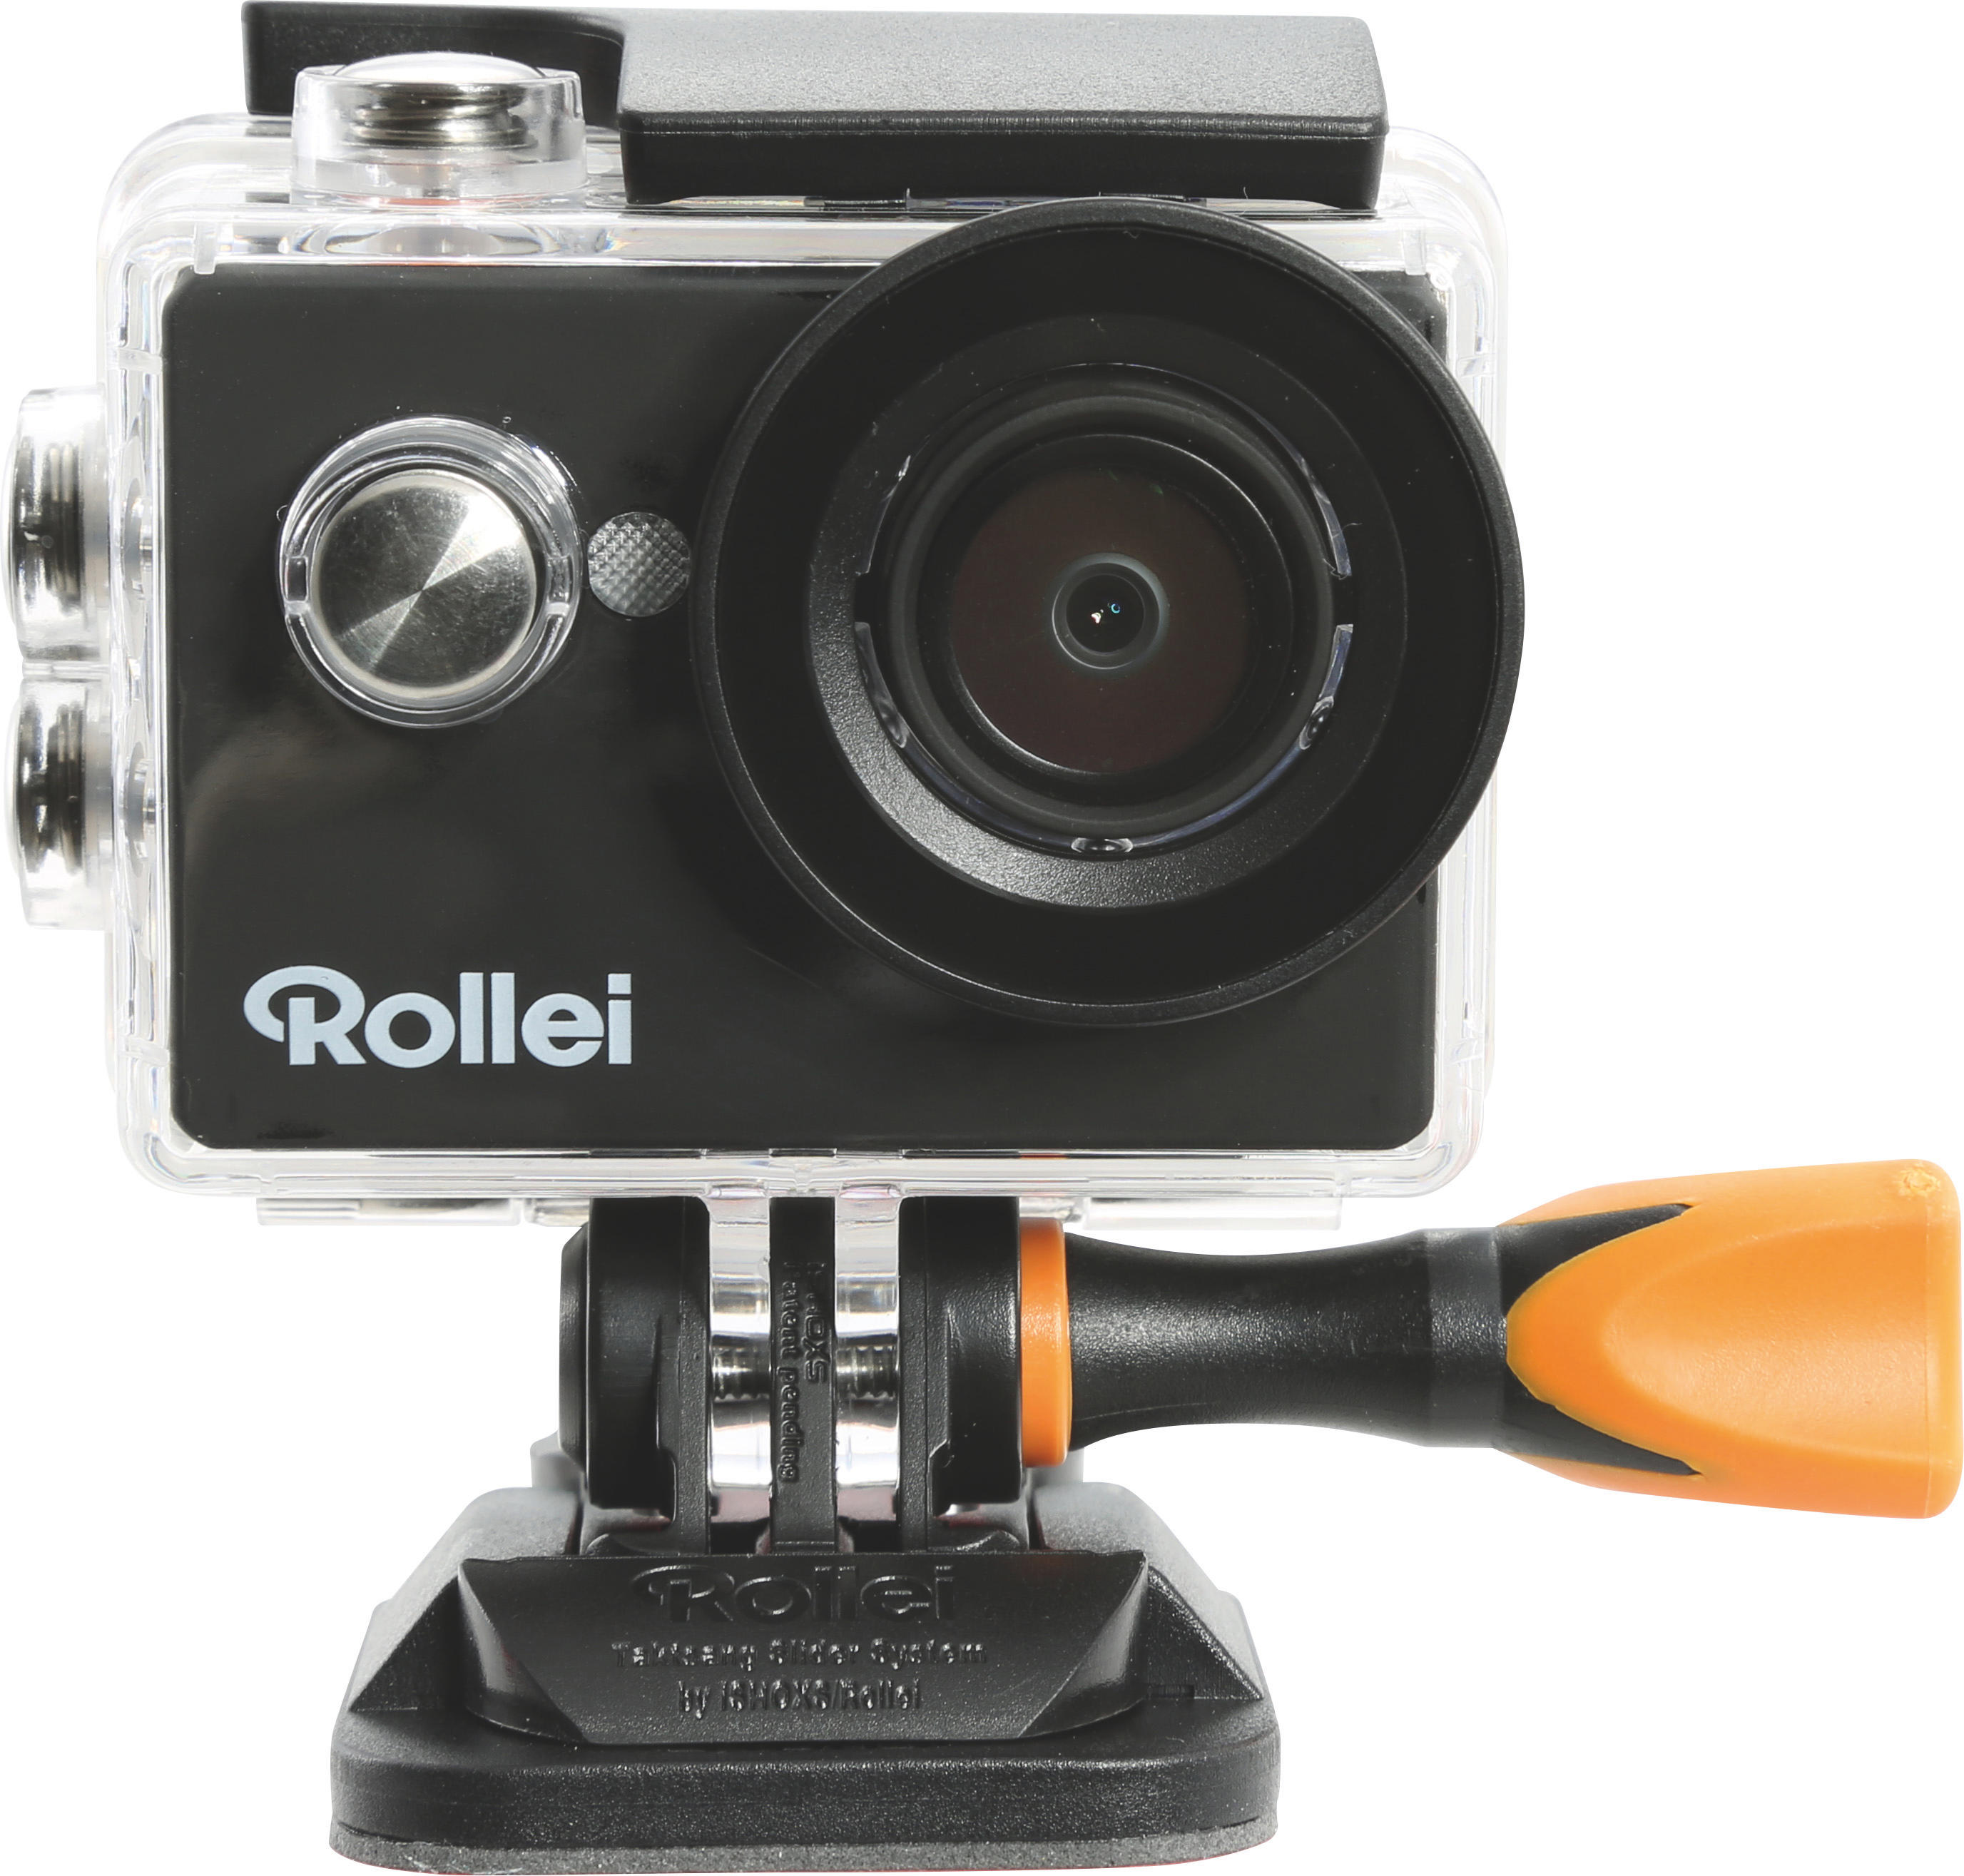 ROLLEI 416 Action Cam